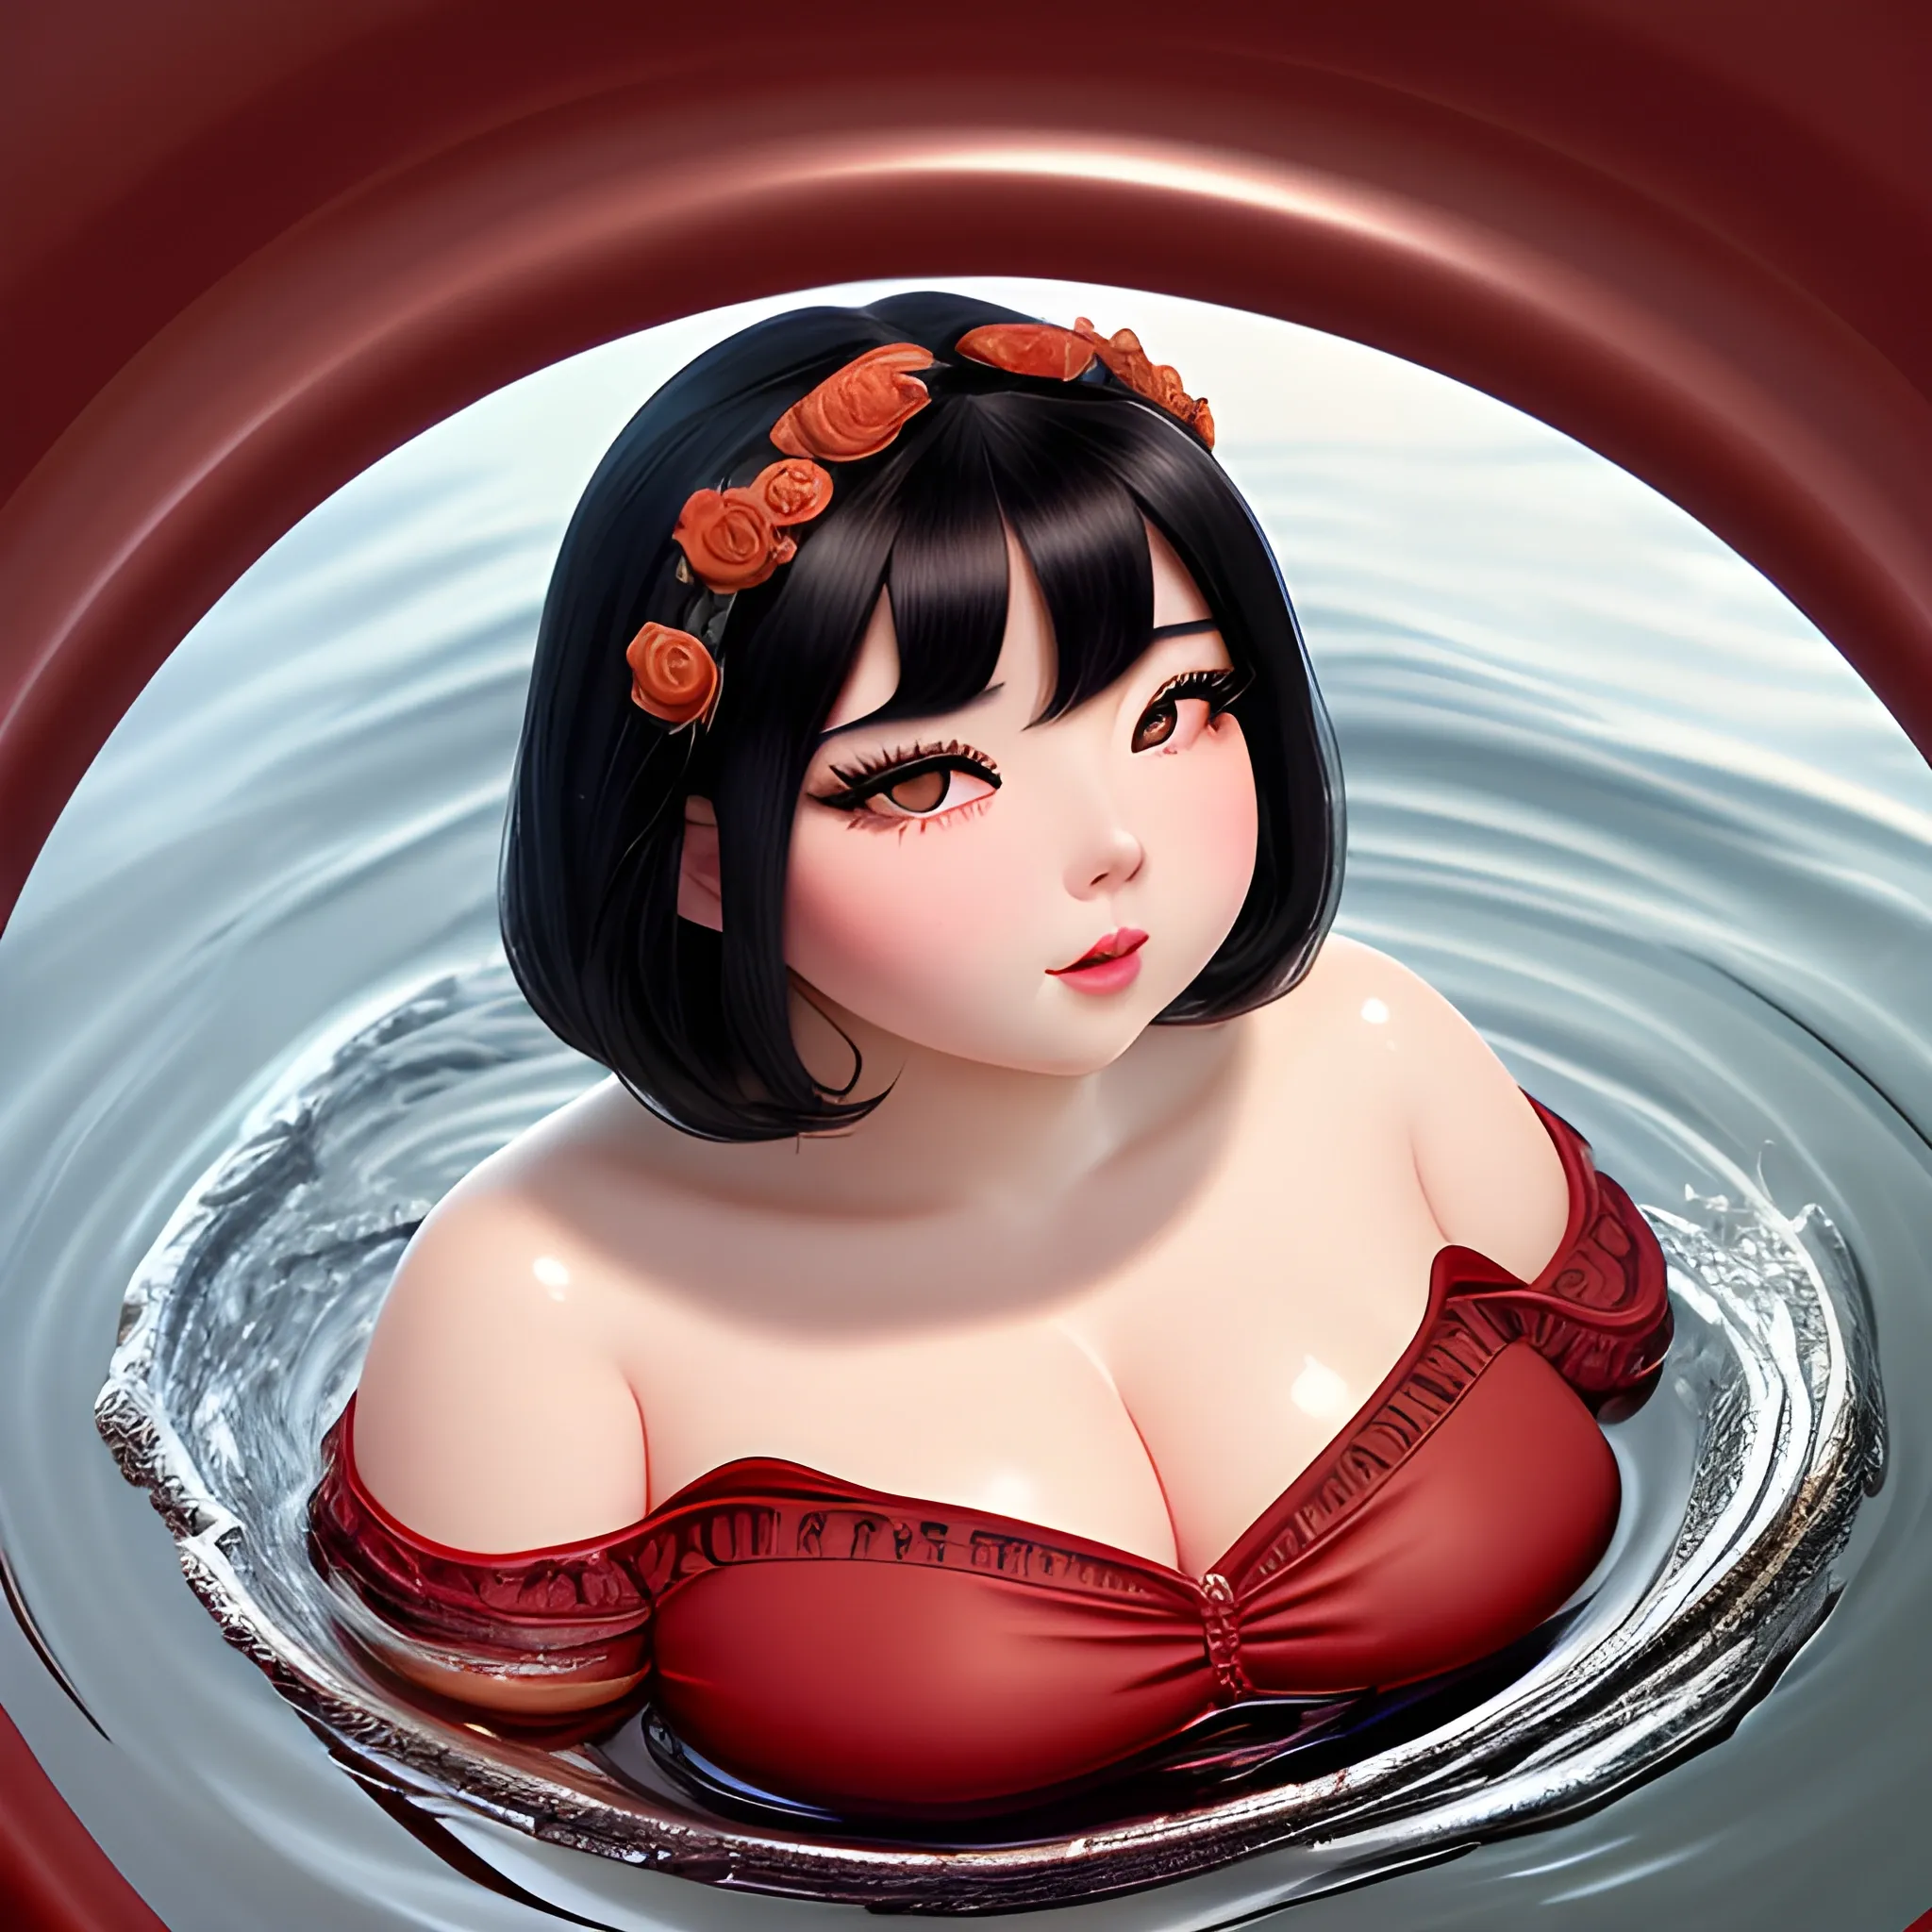 (((high detail))), best quality, Warm Colors, (detailed), (high resolution)Black-haired female, curvy face, with rosy cheeks, big black eyes, thick eyelashes, thick peach lips, thick eyebrows, nose upturned, lying on water, with a black and red dress